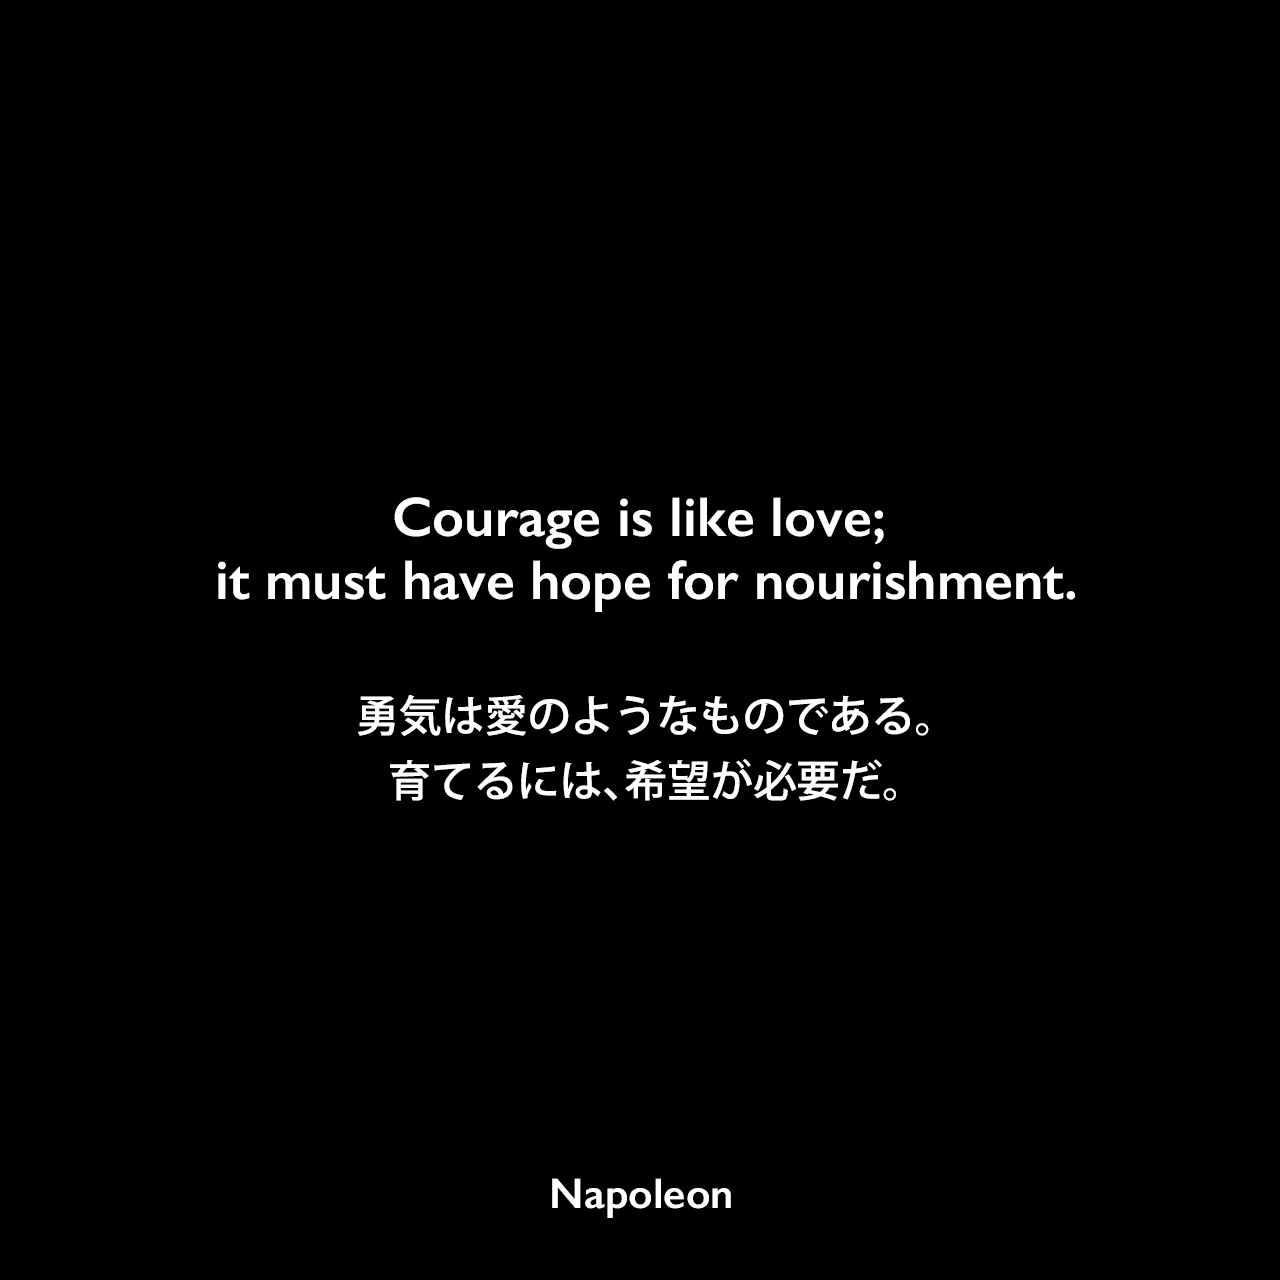 Courage is like love; it must have hope for nourishment.勇気は愛のようなものである。育てるには、希望が必要だ。Napoleon